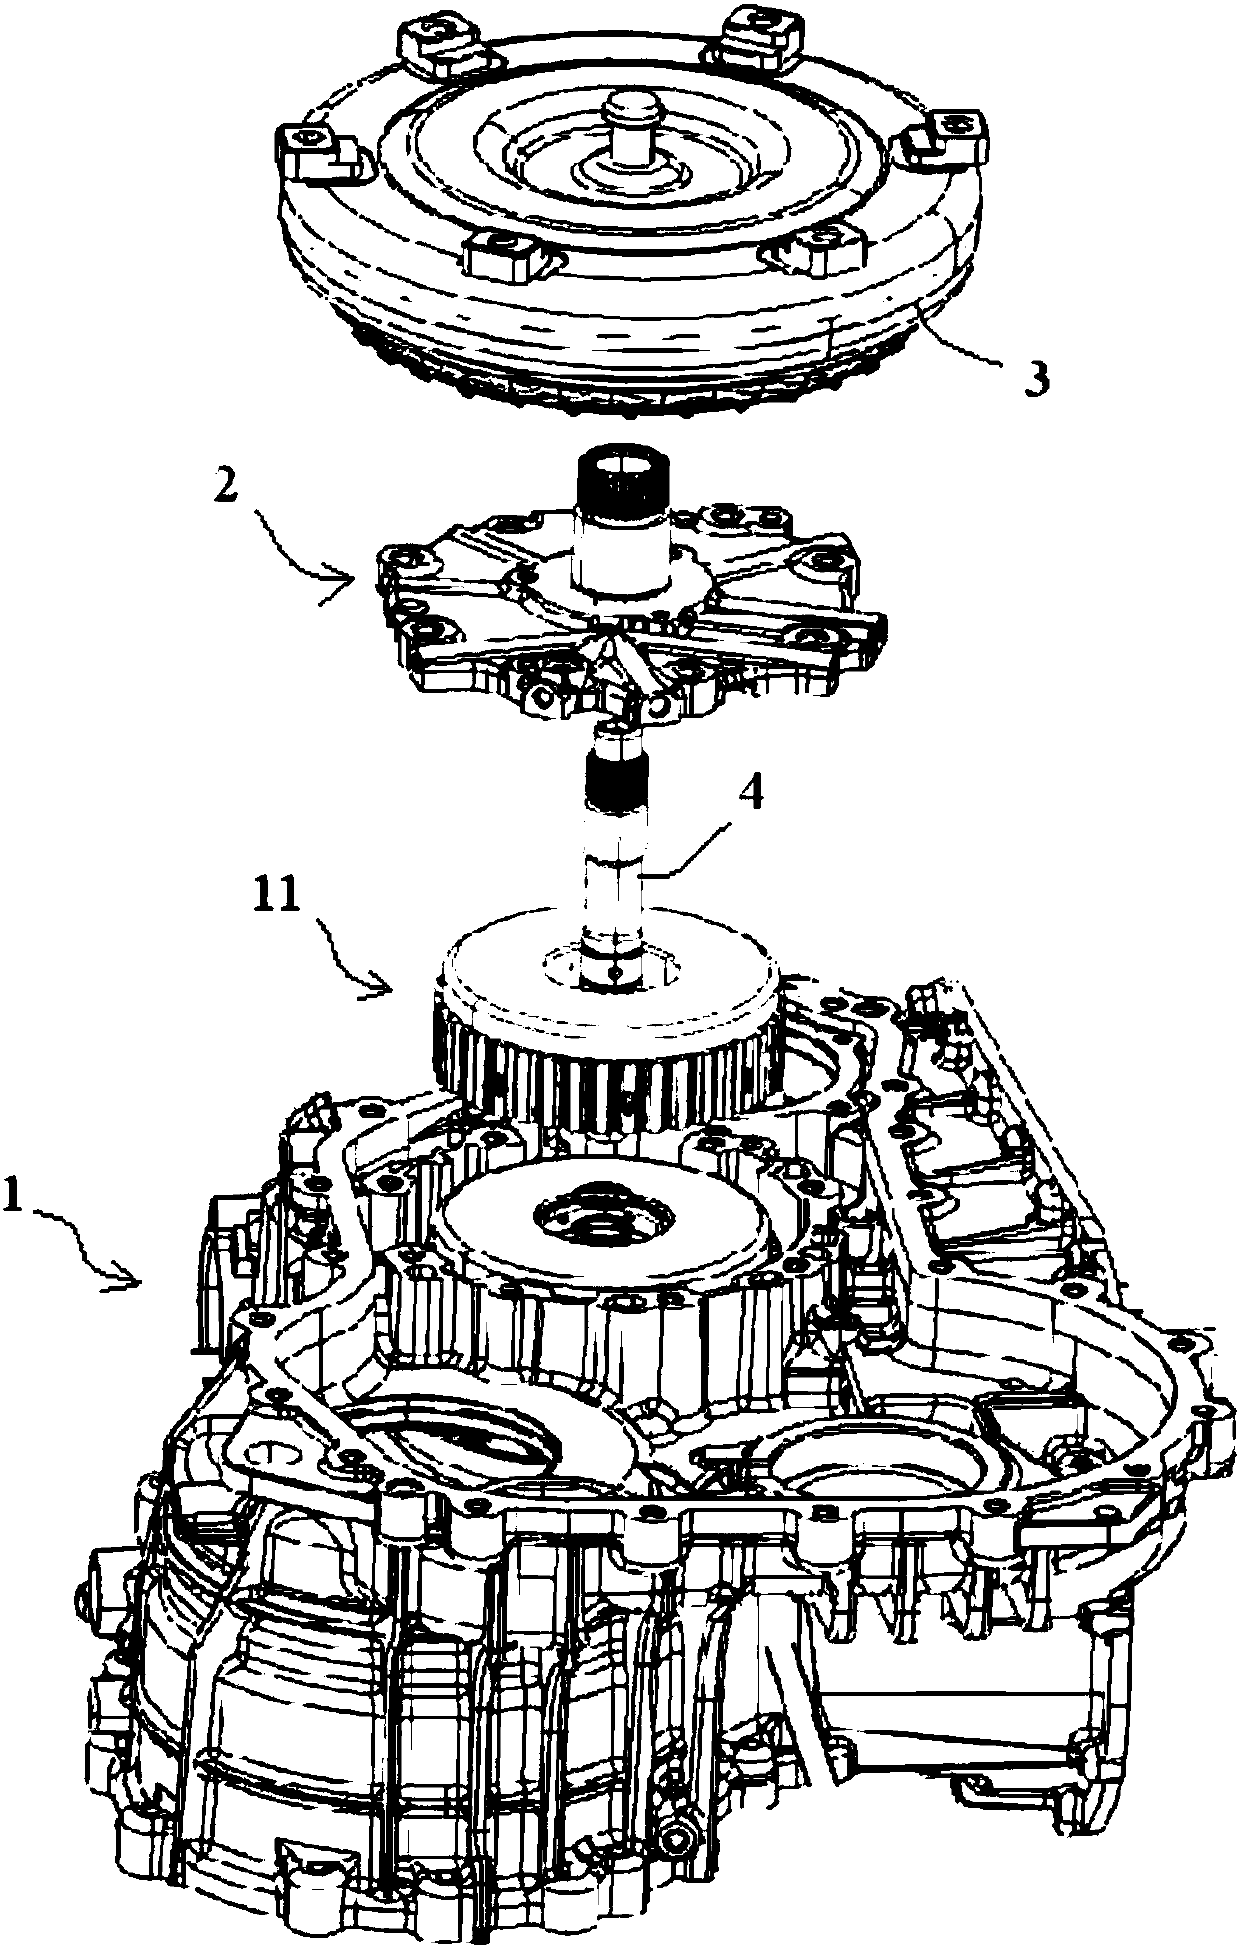 Oil distributing system of gearbox and oil distributing disc assembly